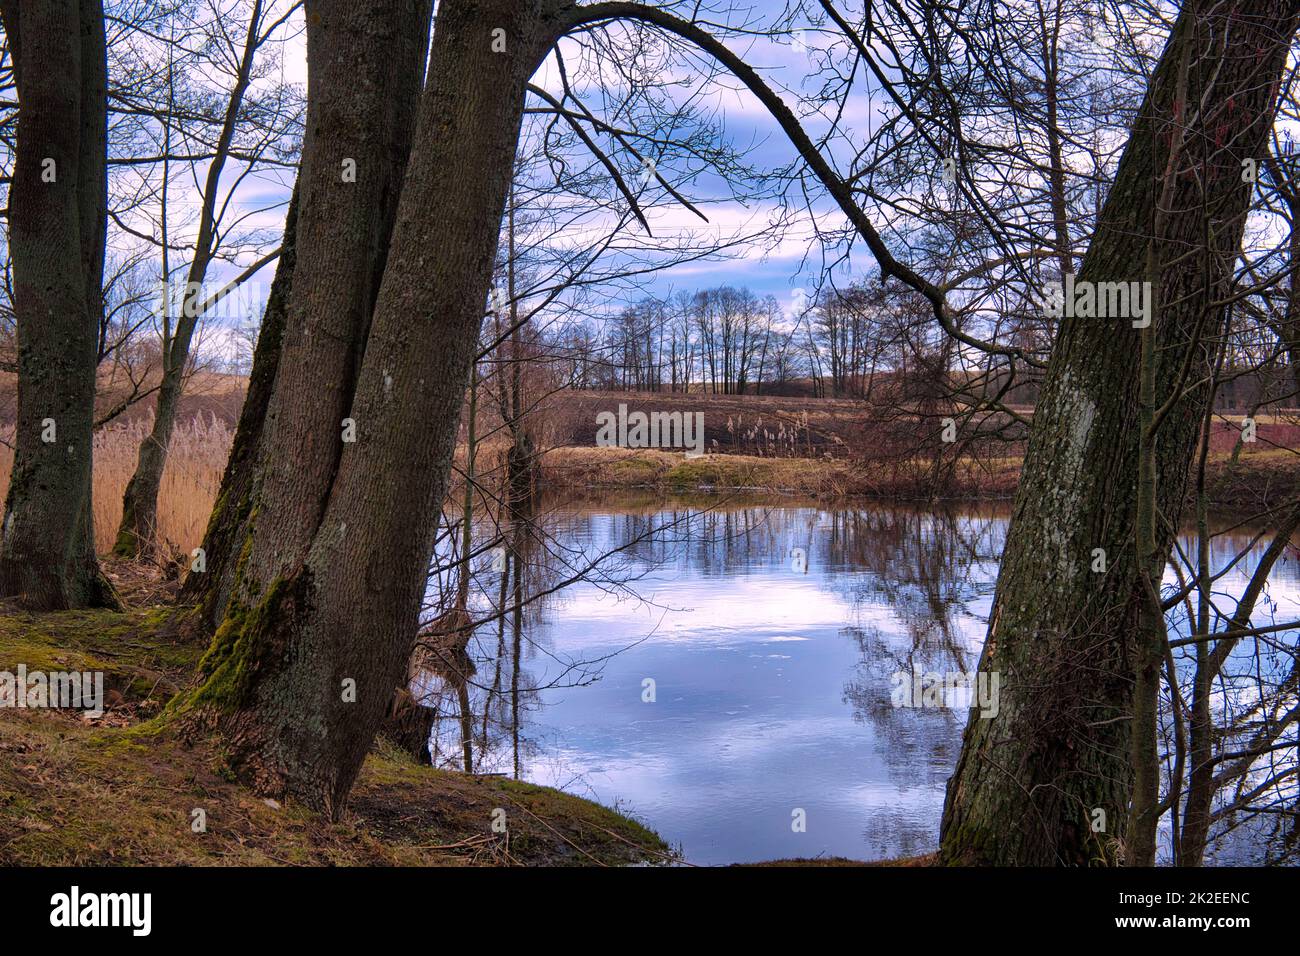 Tranquil lake with reflections of surrounding trees Stock Photo